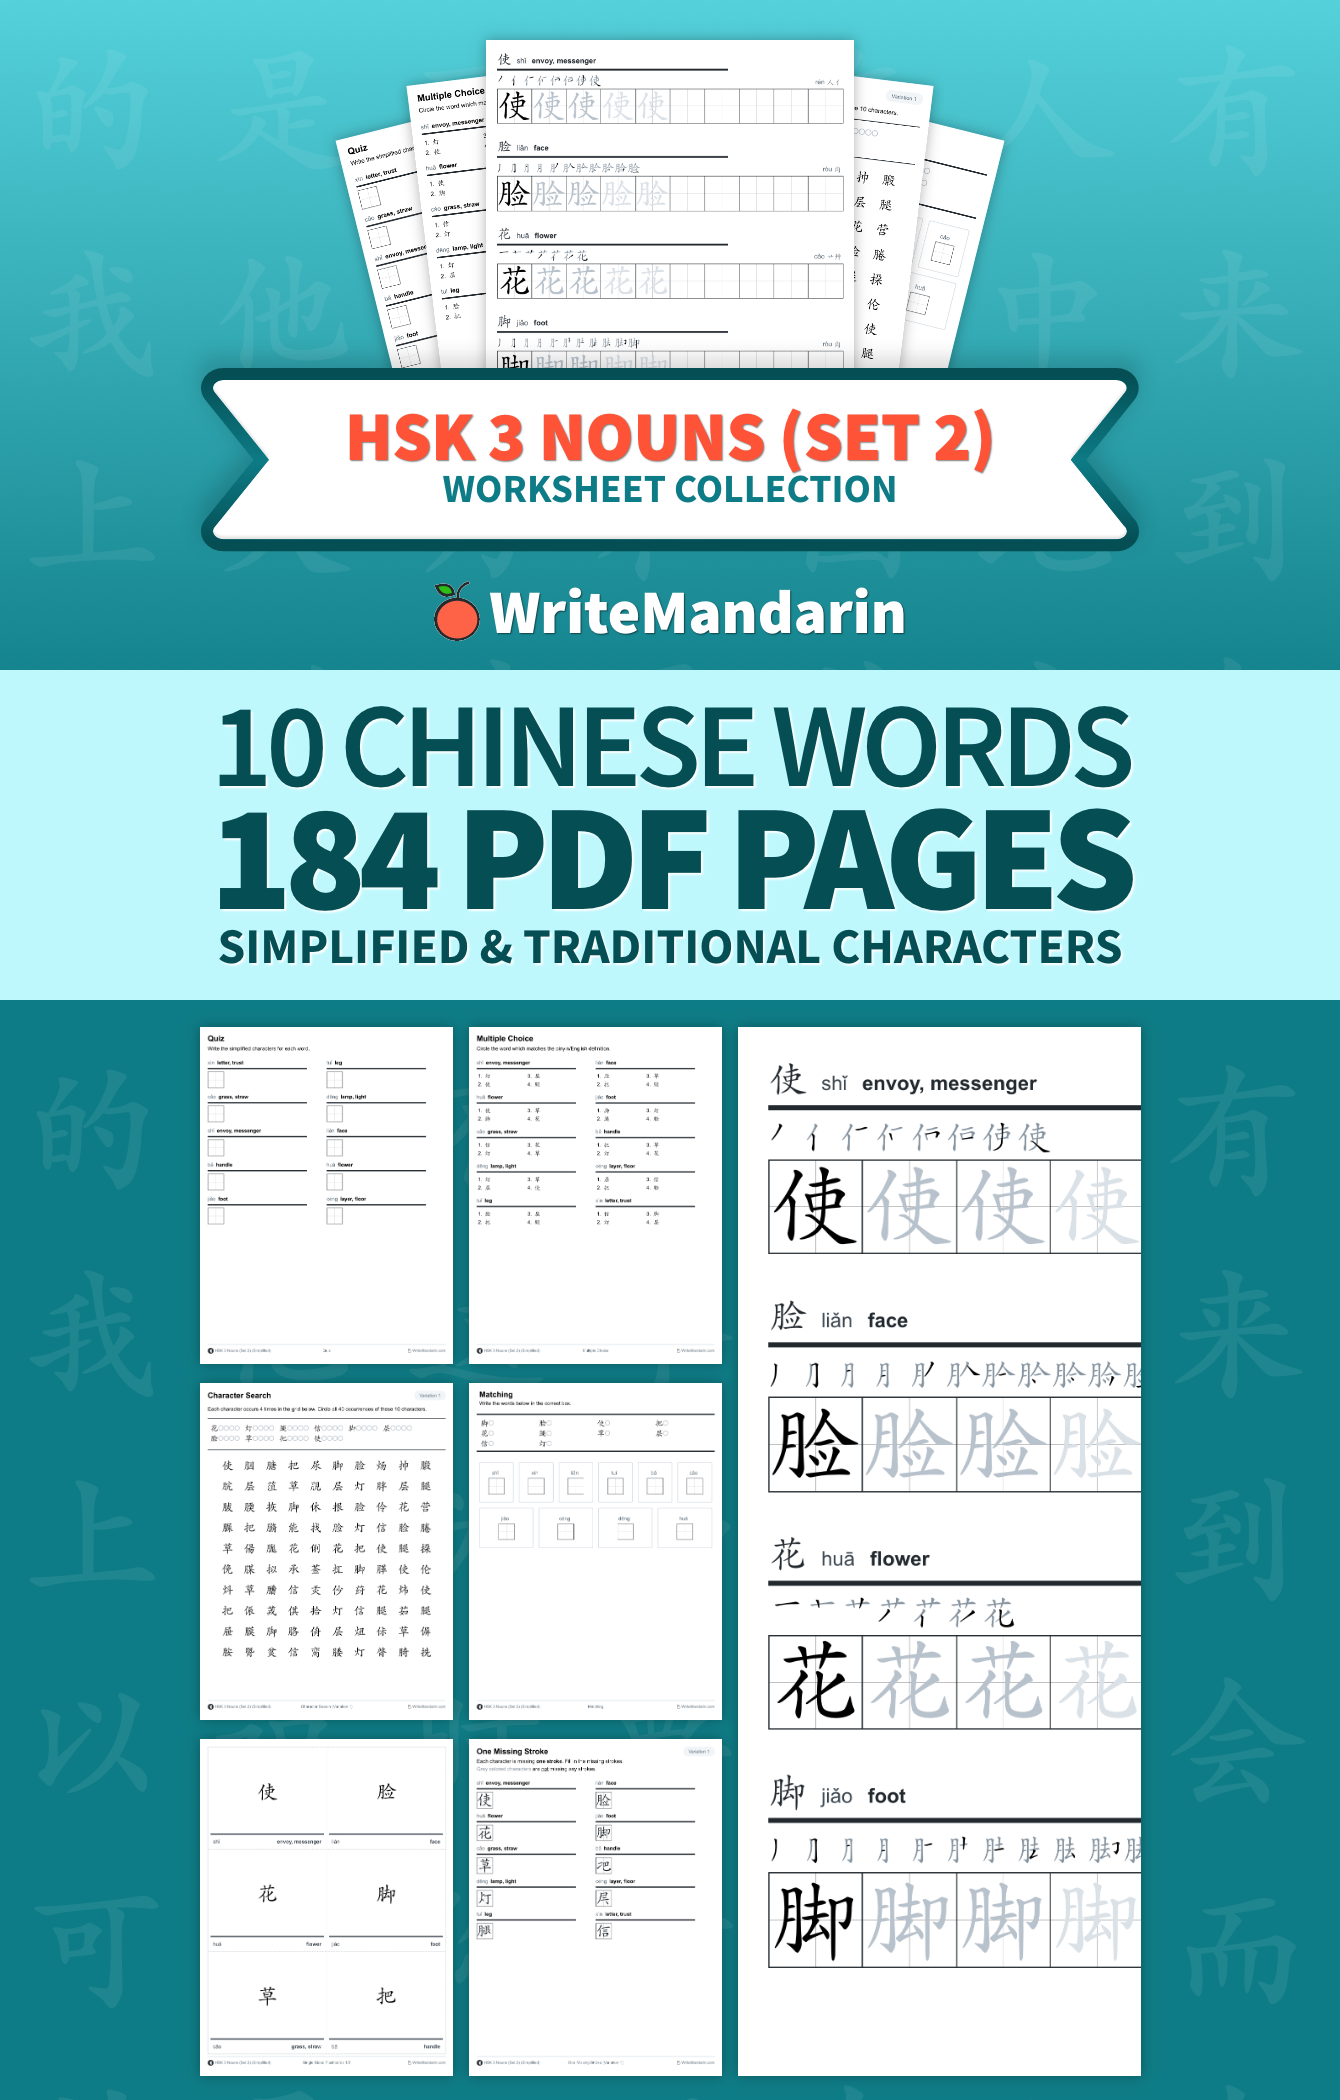 Preview image of HSK 3 Nouns (Set 2) worksheet collection